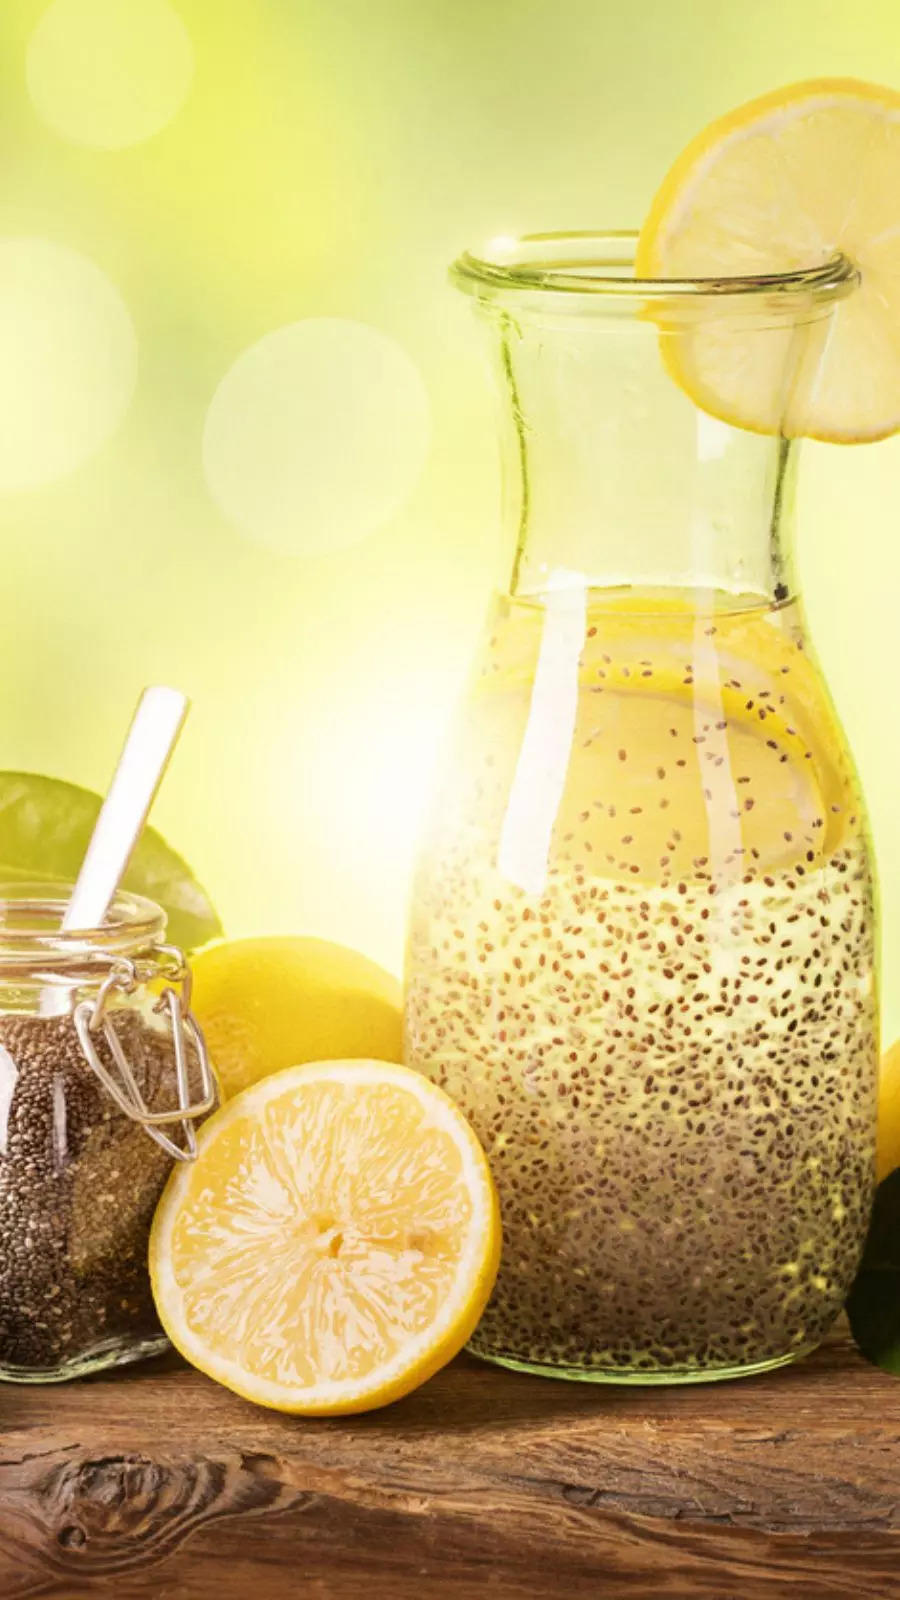 Summer weight loss drink: How to make lemon chia seeds water    